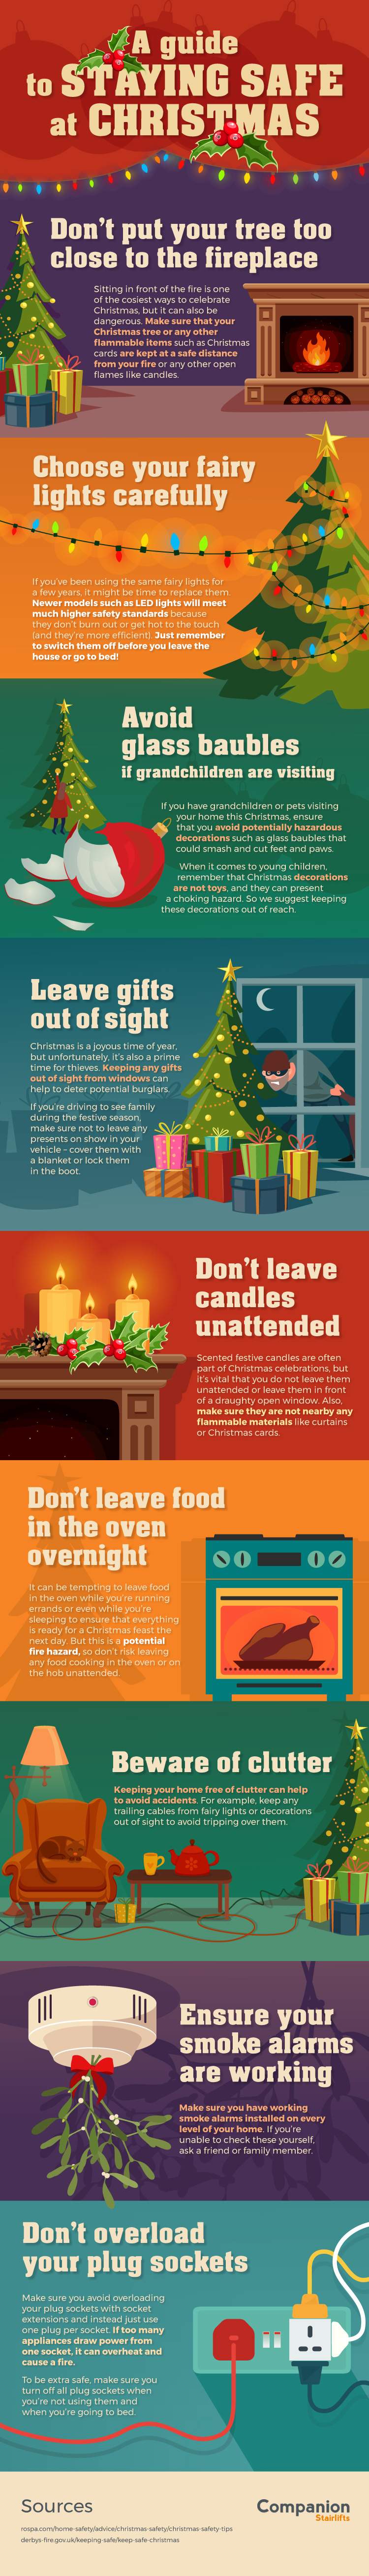 guide to staying safe at Christmas